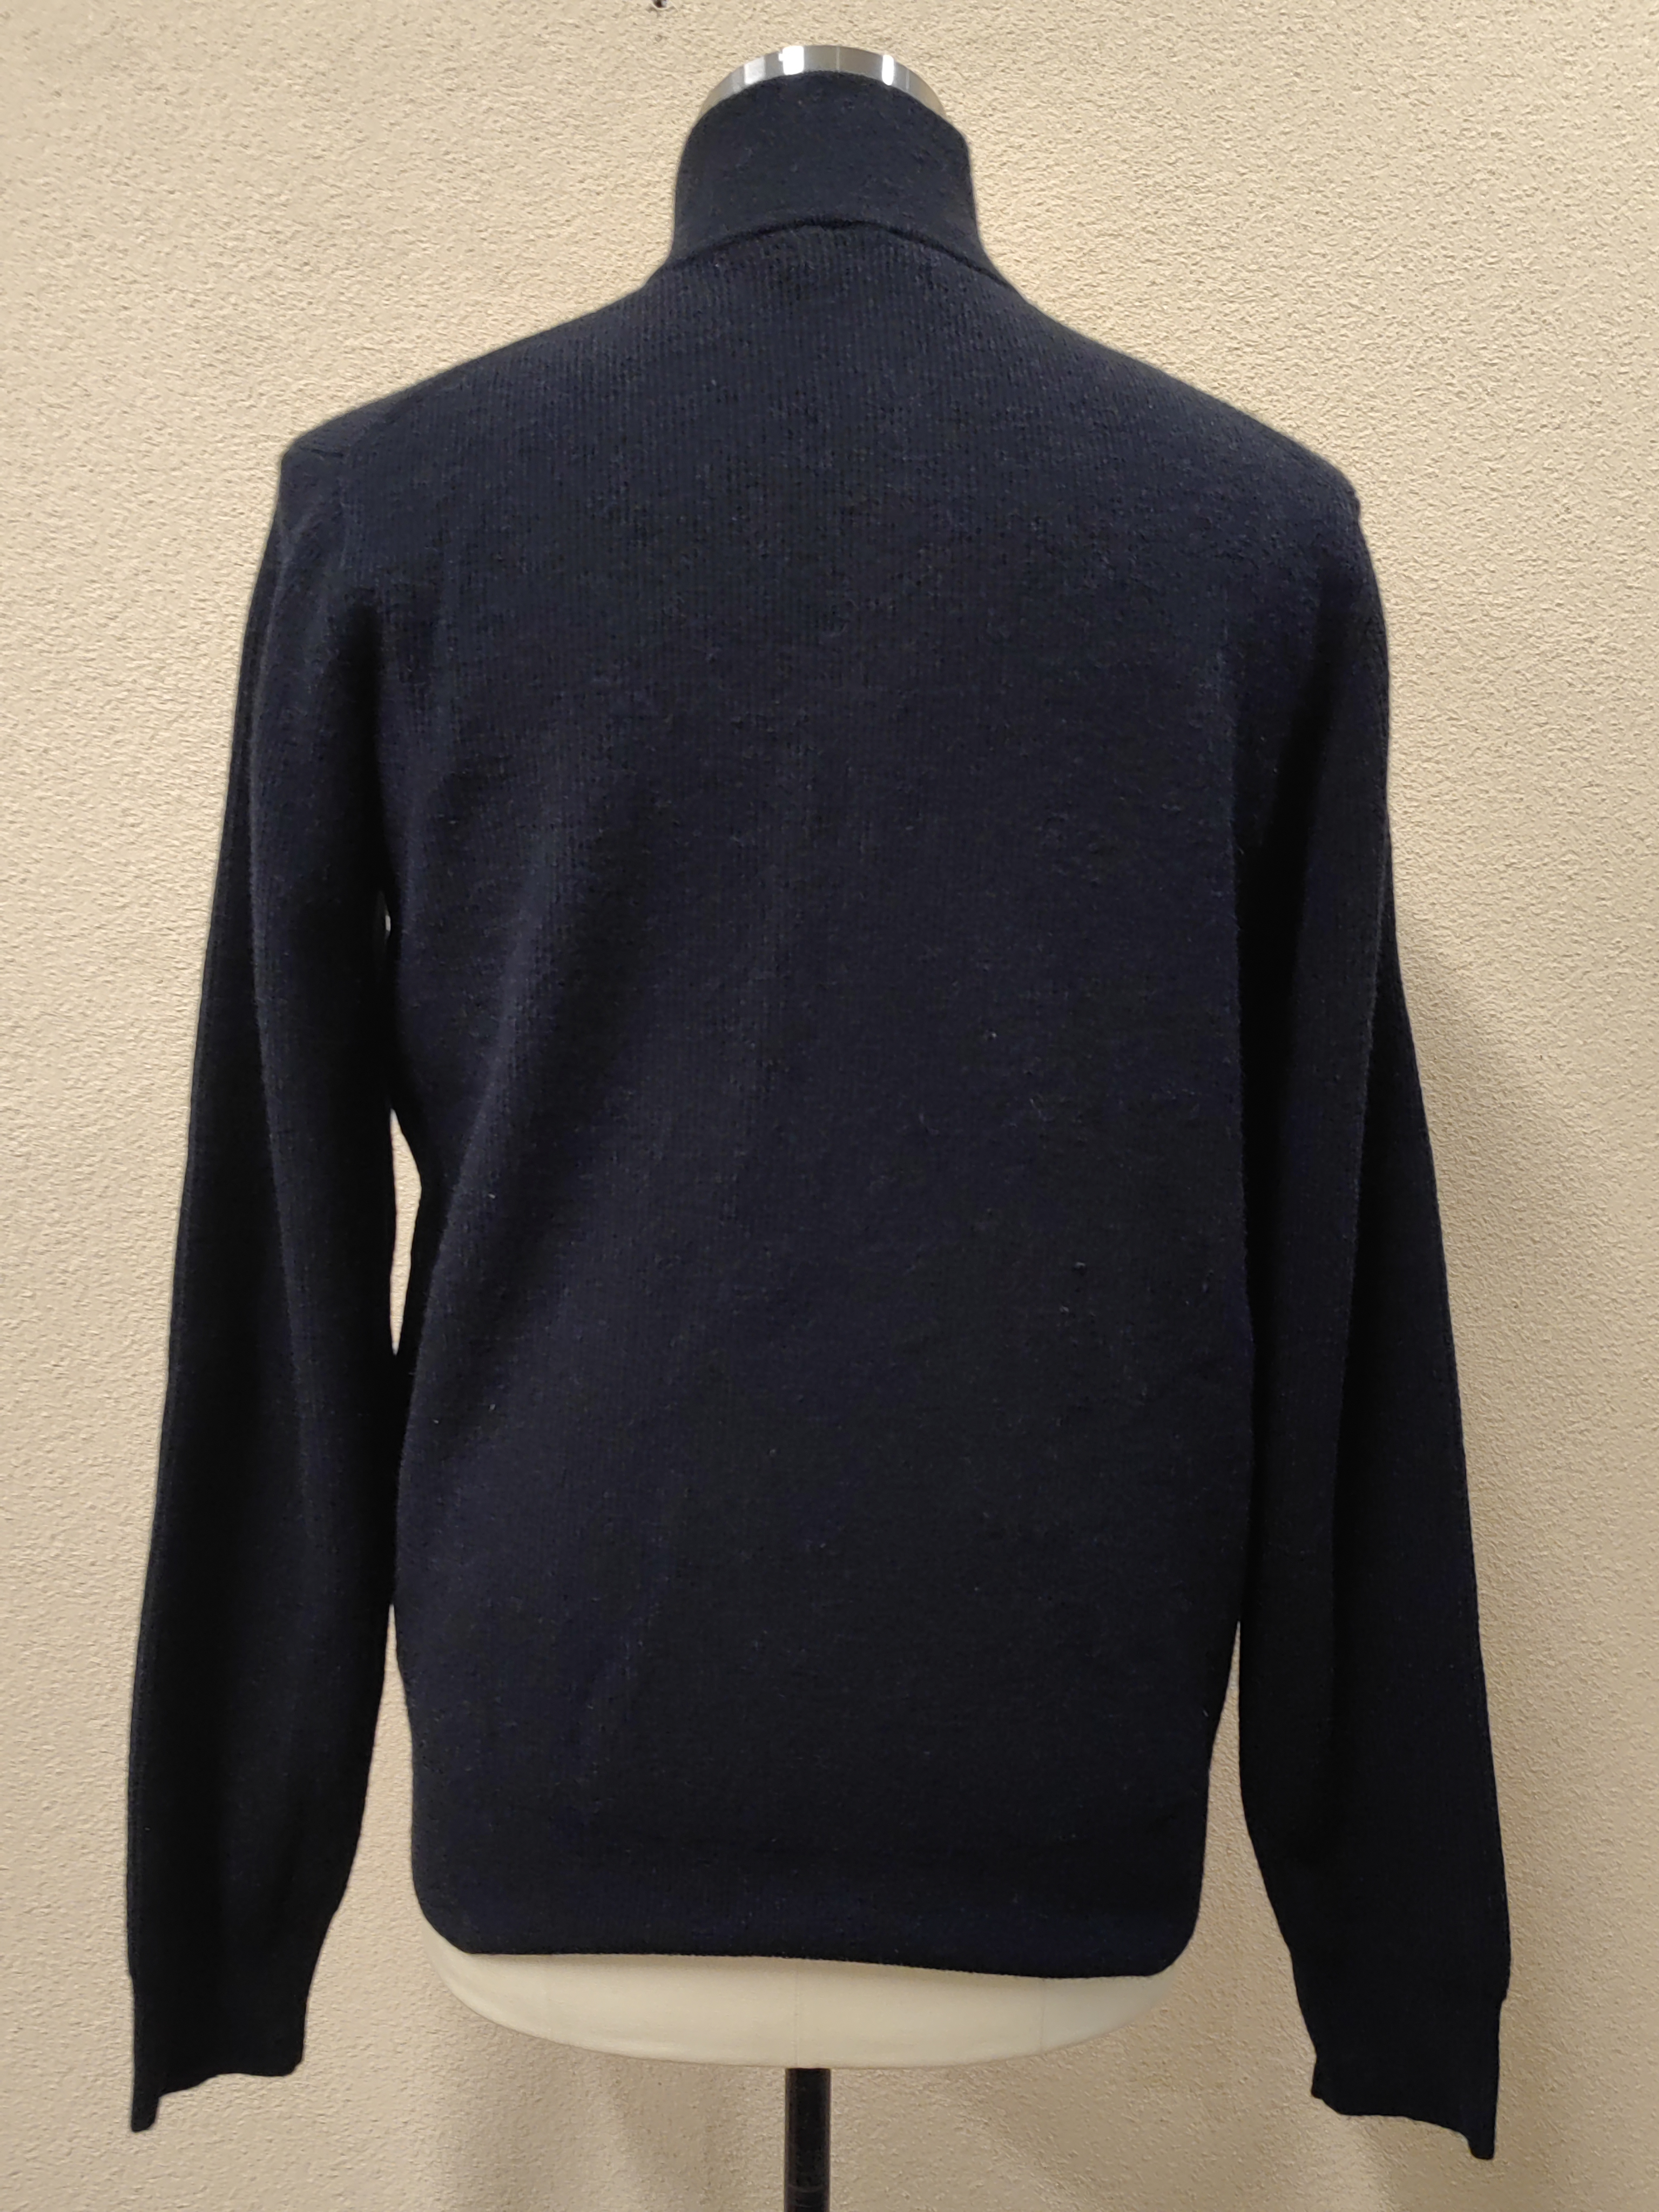 Chinse Supplier Black Knitted Wool Plain Long Sleeve Men's Turtleneck Pullovers Sweater 